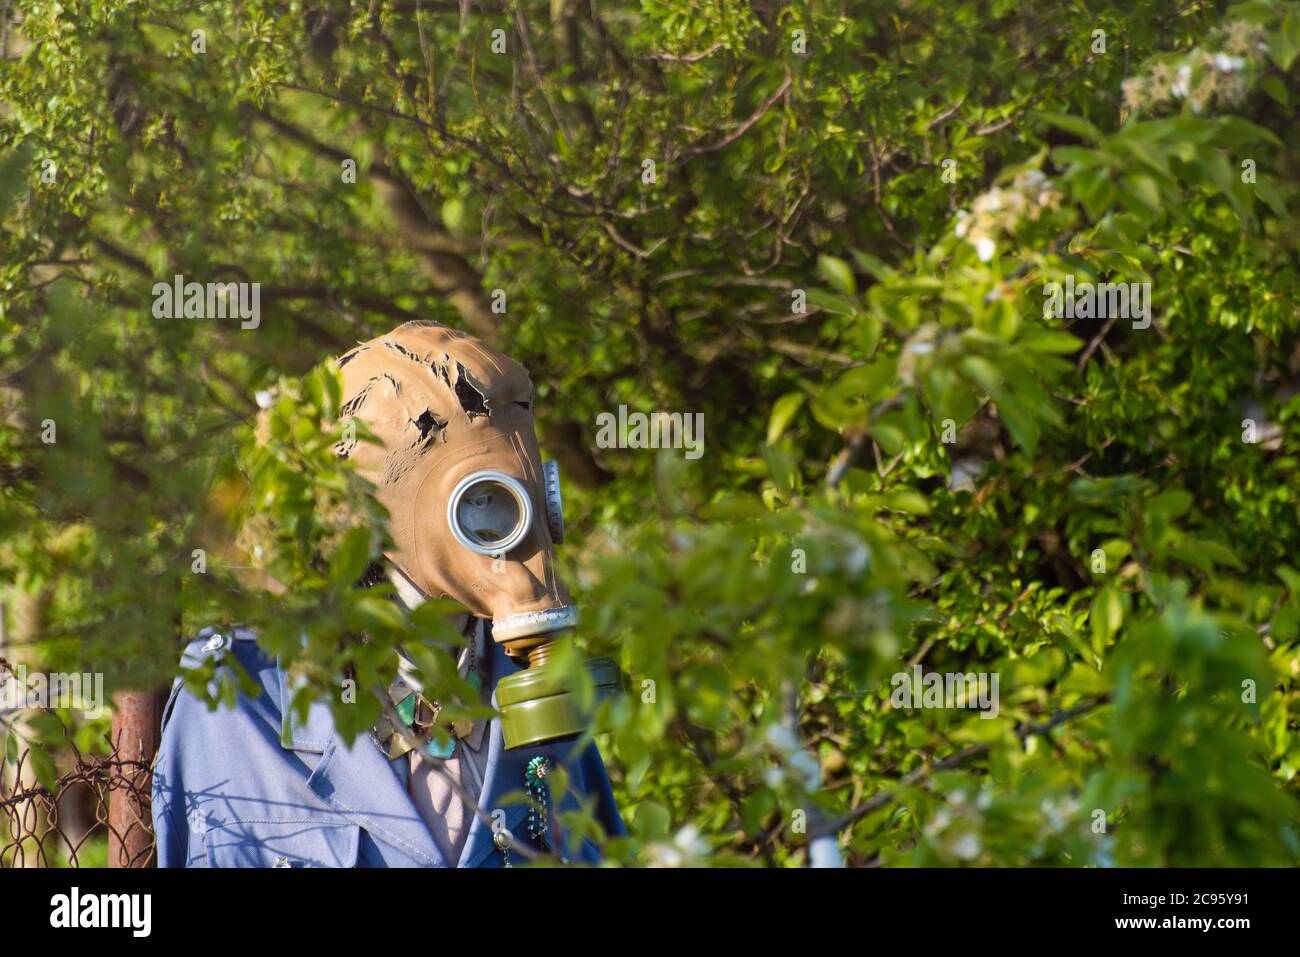 mannequin with a gas mask in the green foliage of trees, symbolizing the problem of air pollution, the global spread of the virus on the planet Stock Photo